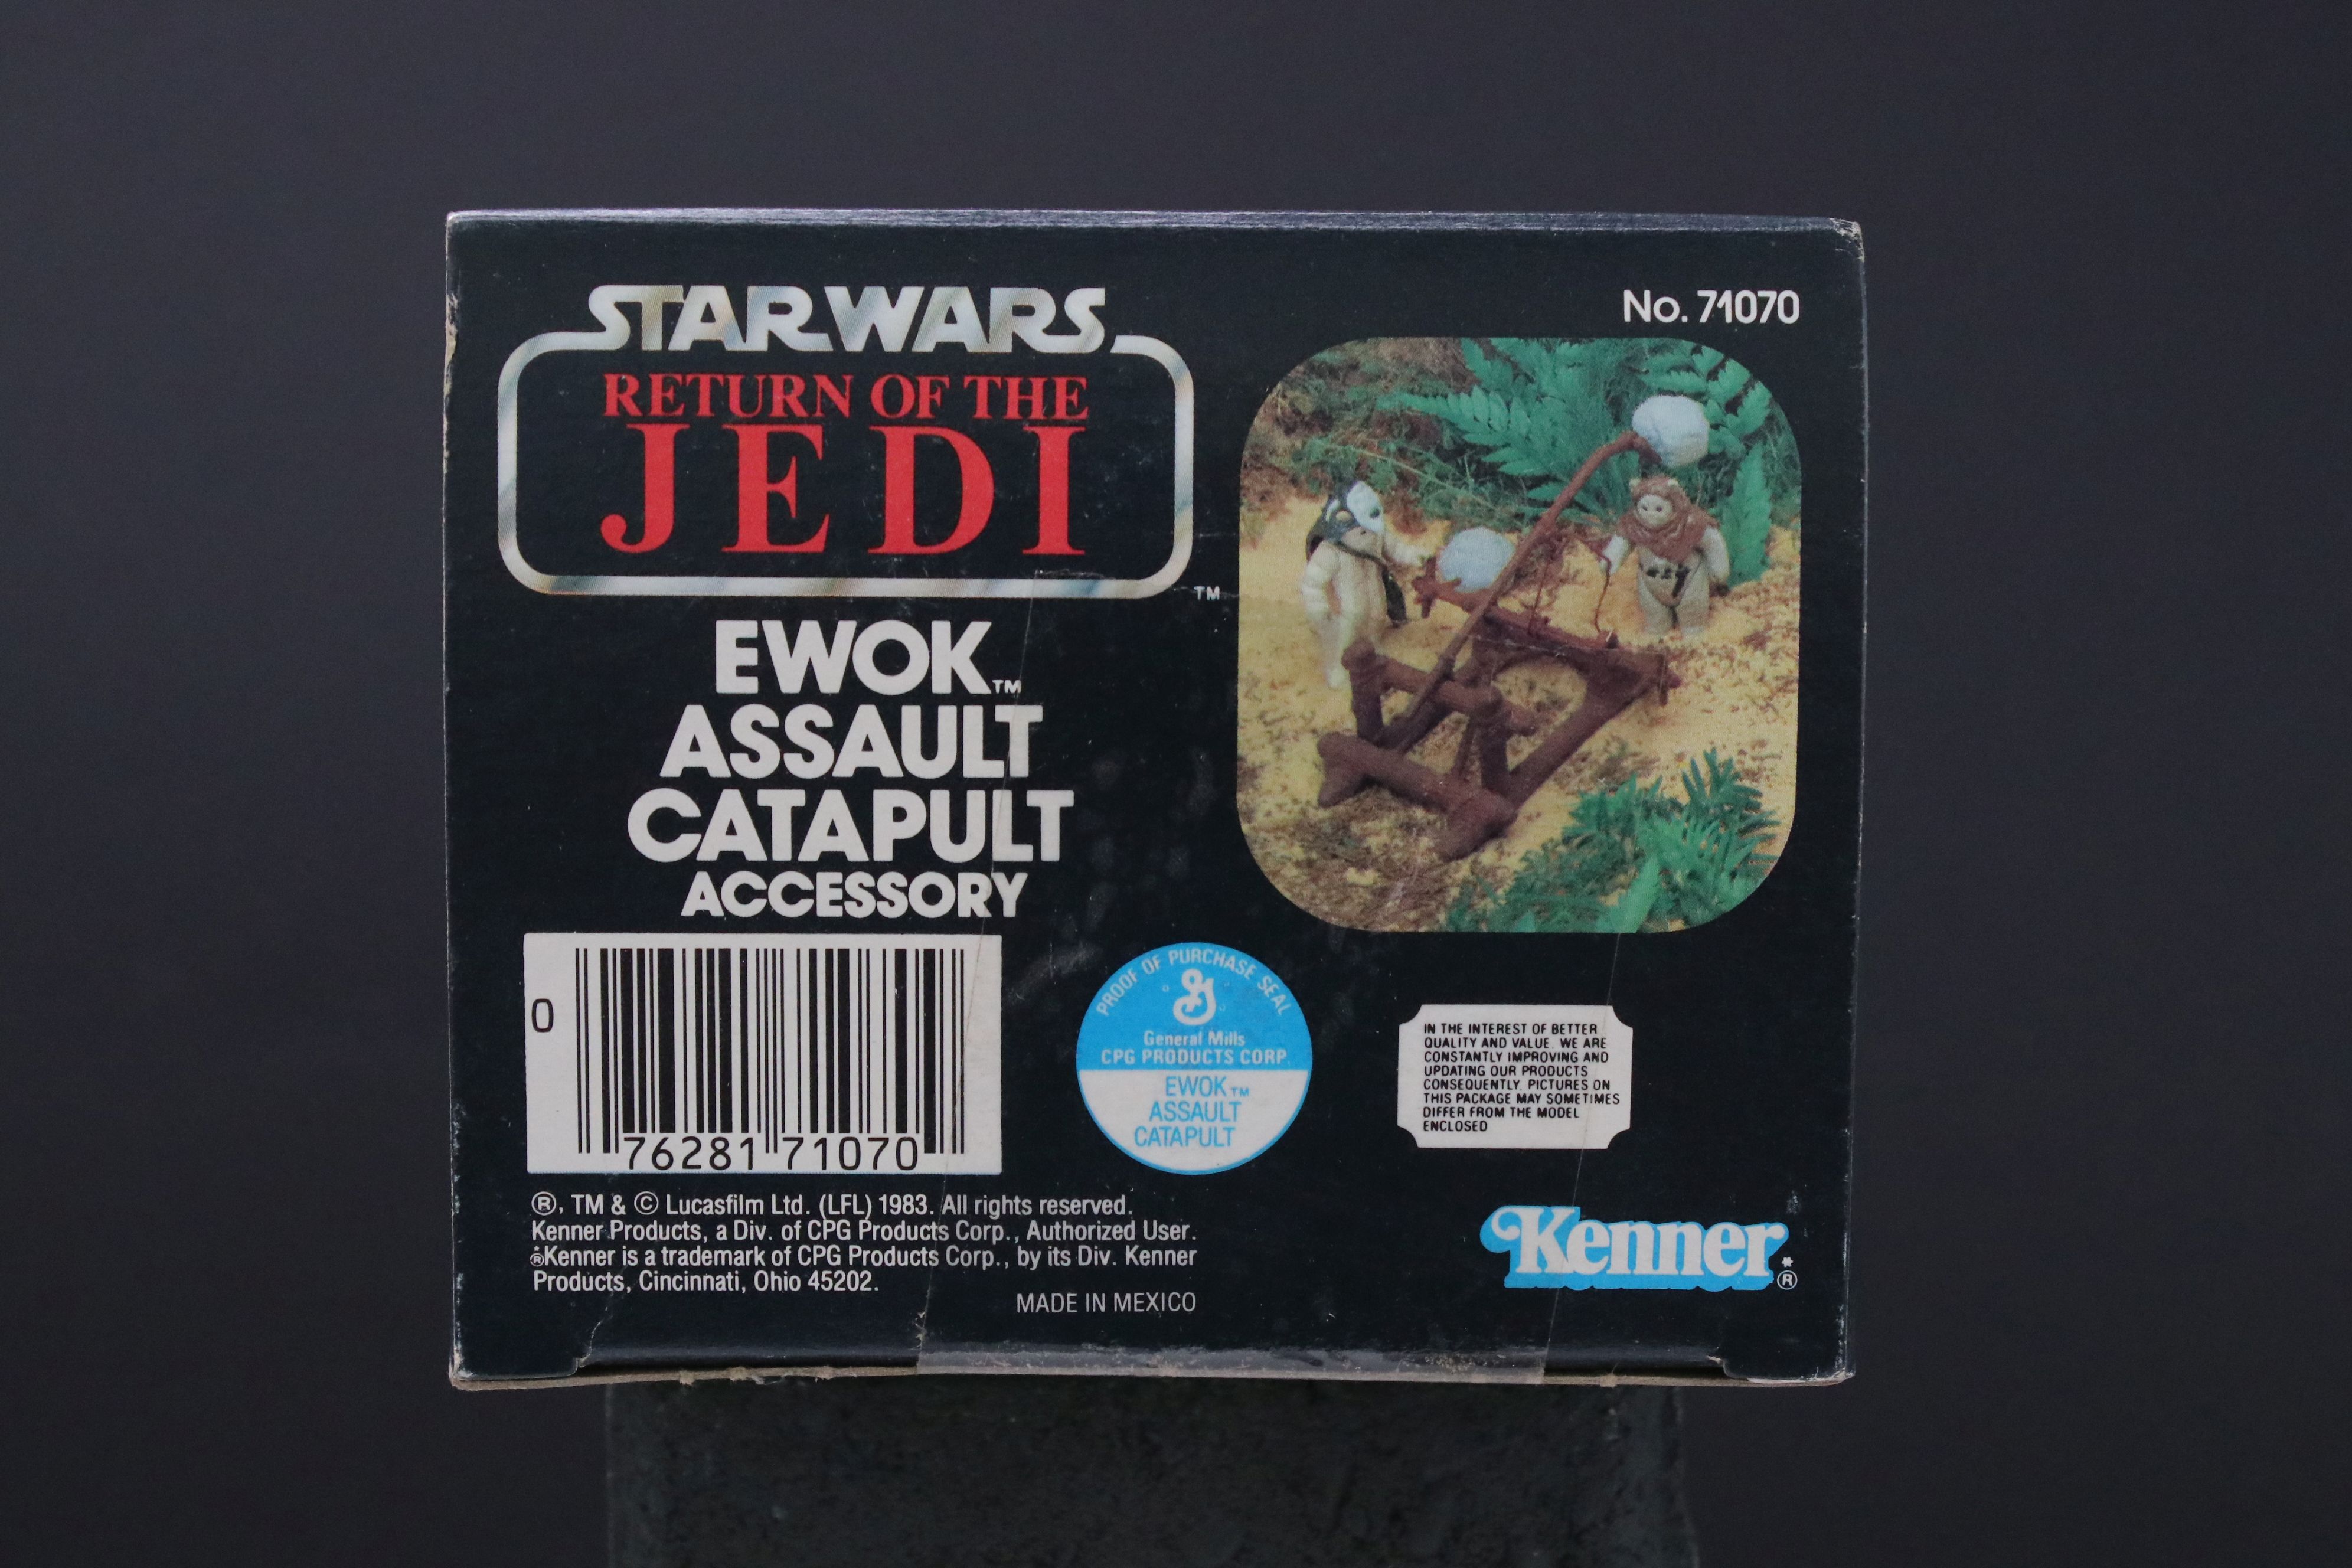 Star Wars - Boxed original Kenner Star Wars Return of the Jedi Ewok Assault Catapult accessory, - Image 4 of 7